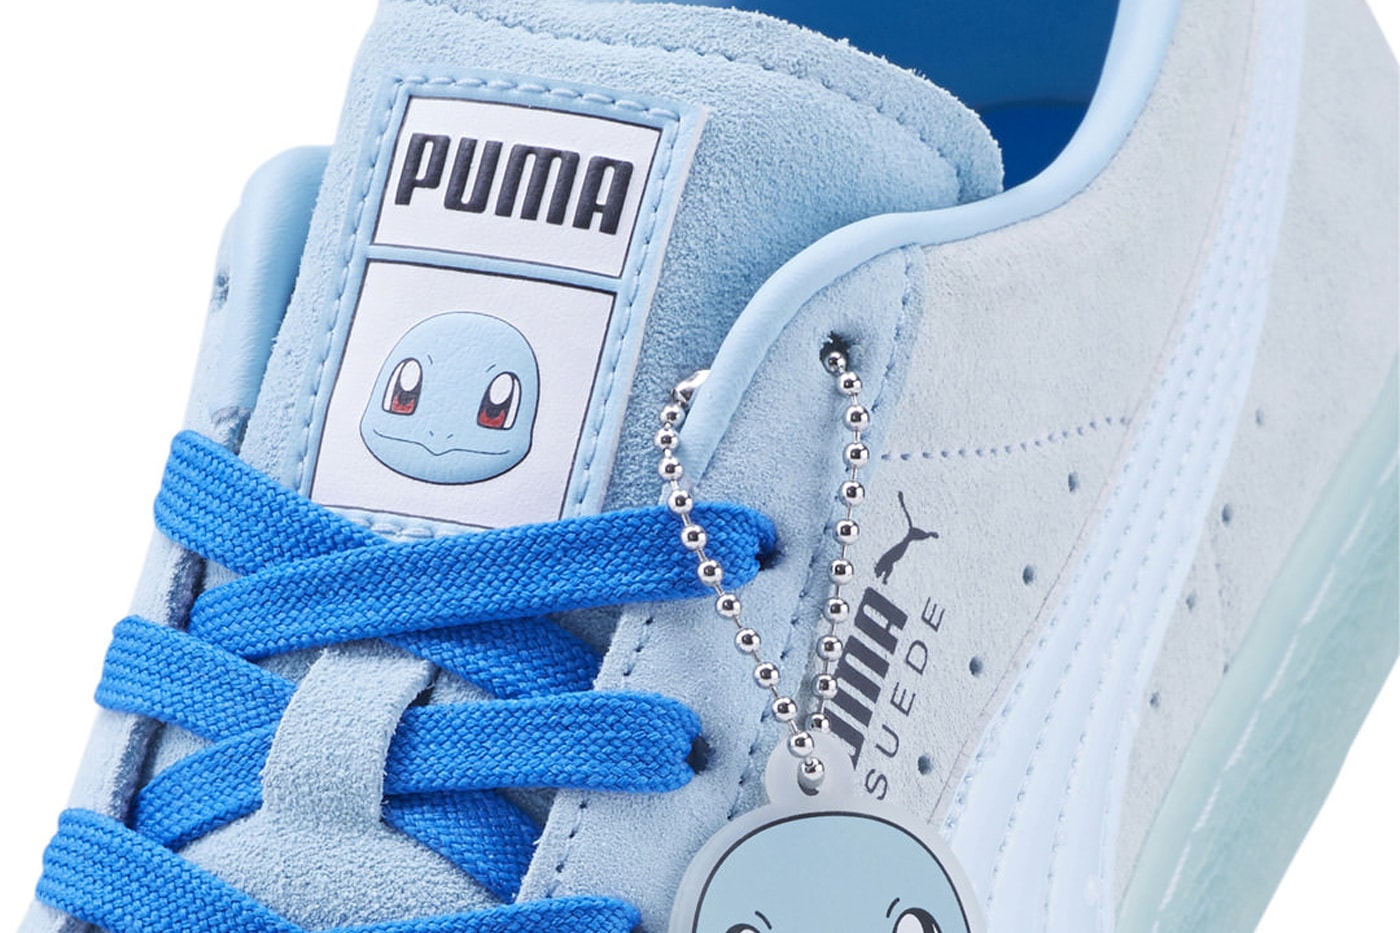 pokemon puma 25 years footwear sneaker collection bulbasaur rider fv charmander slipstream lo squirtle puma suede pikachu rider fv rs x pokedex release info date price